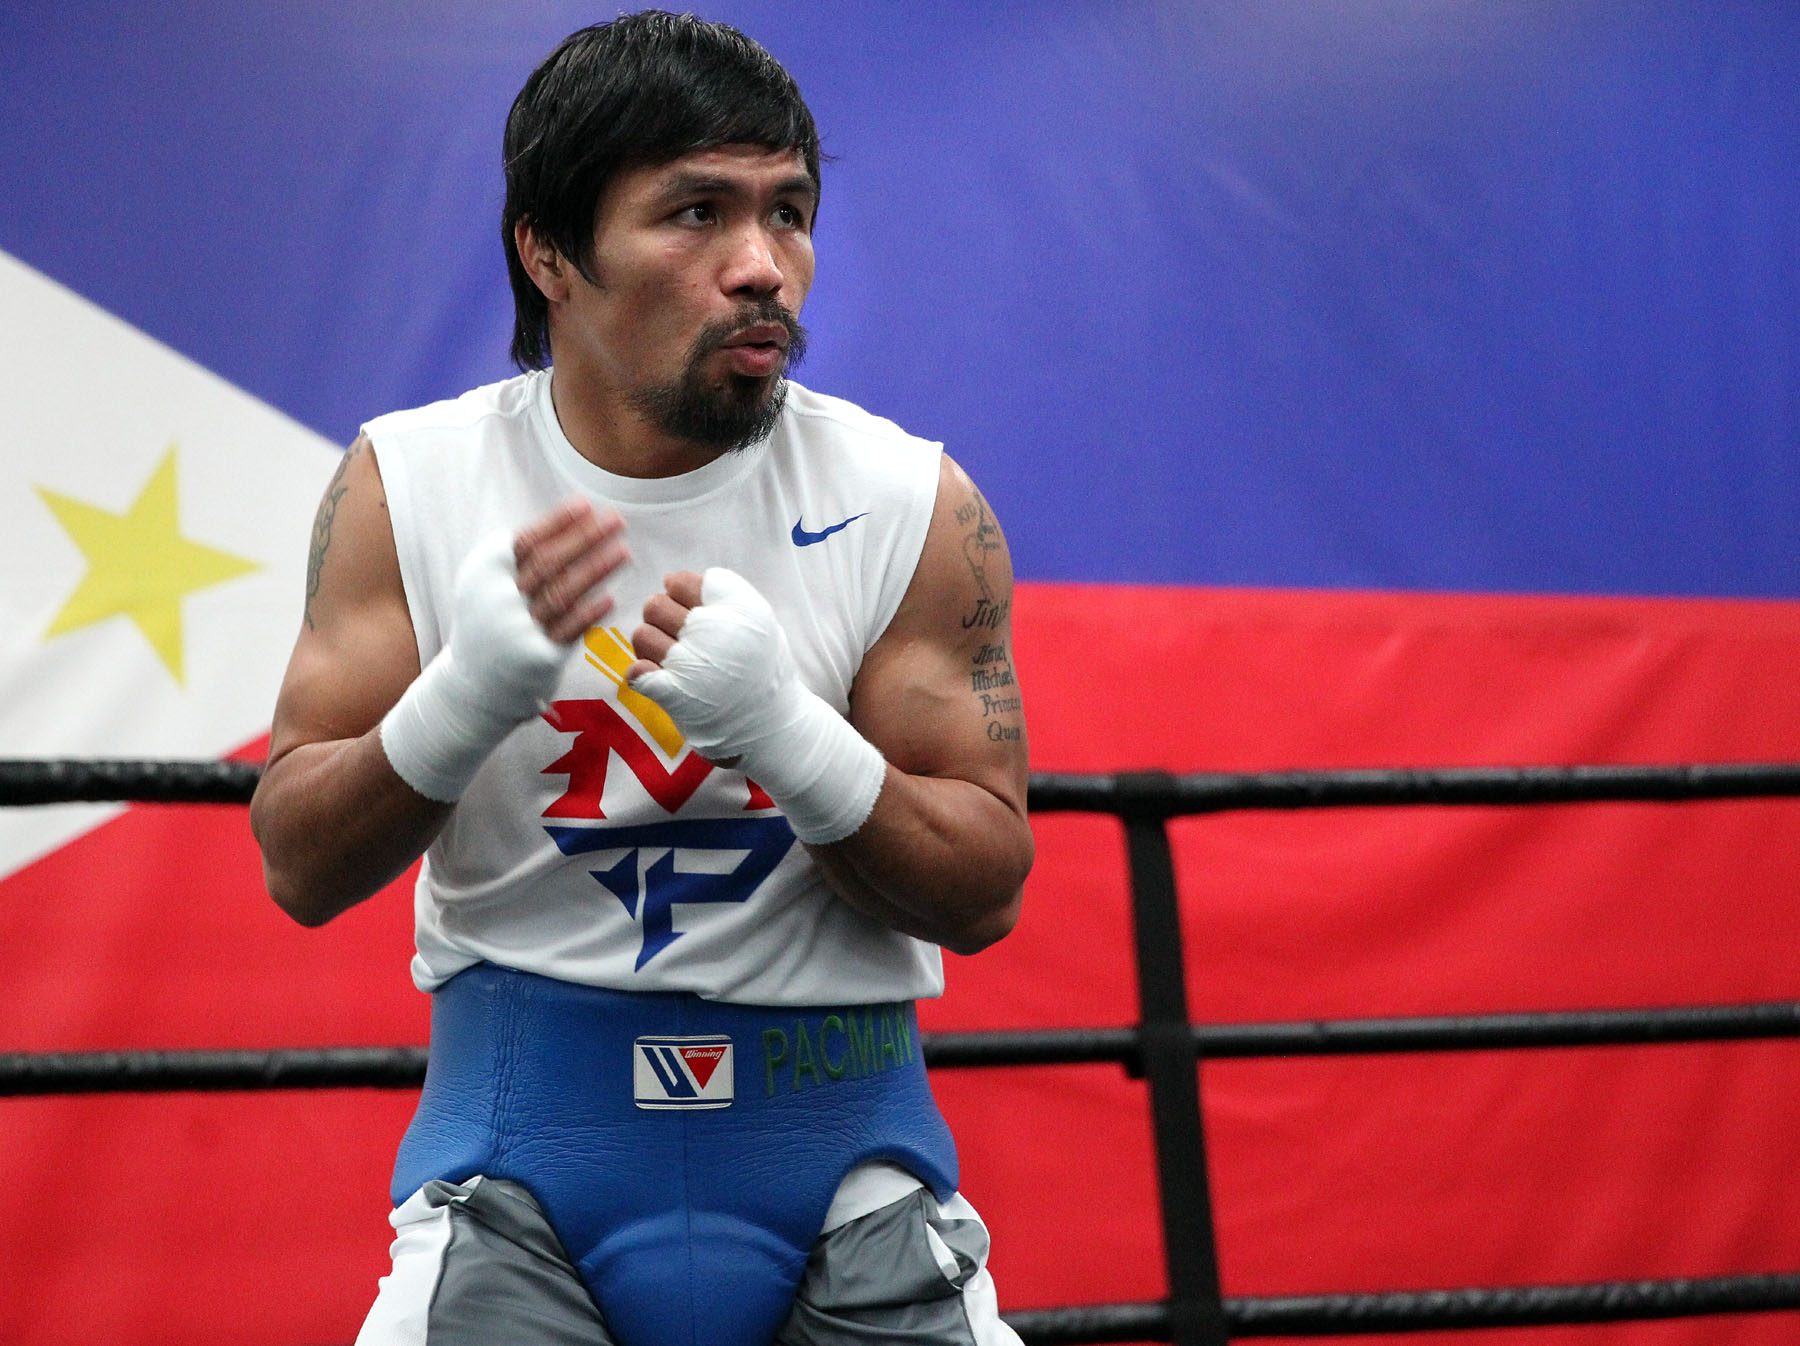 Pacman Fever sweeps the Philippines ahead of Mayweather fight